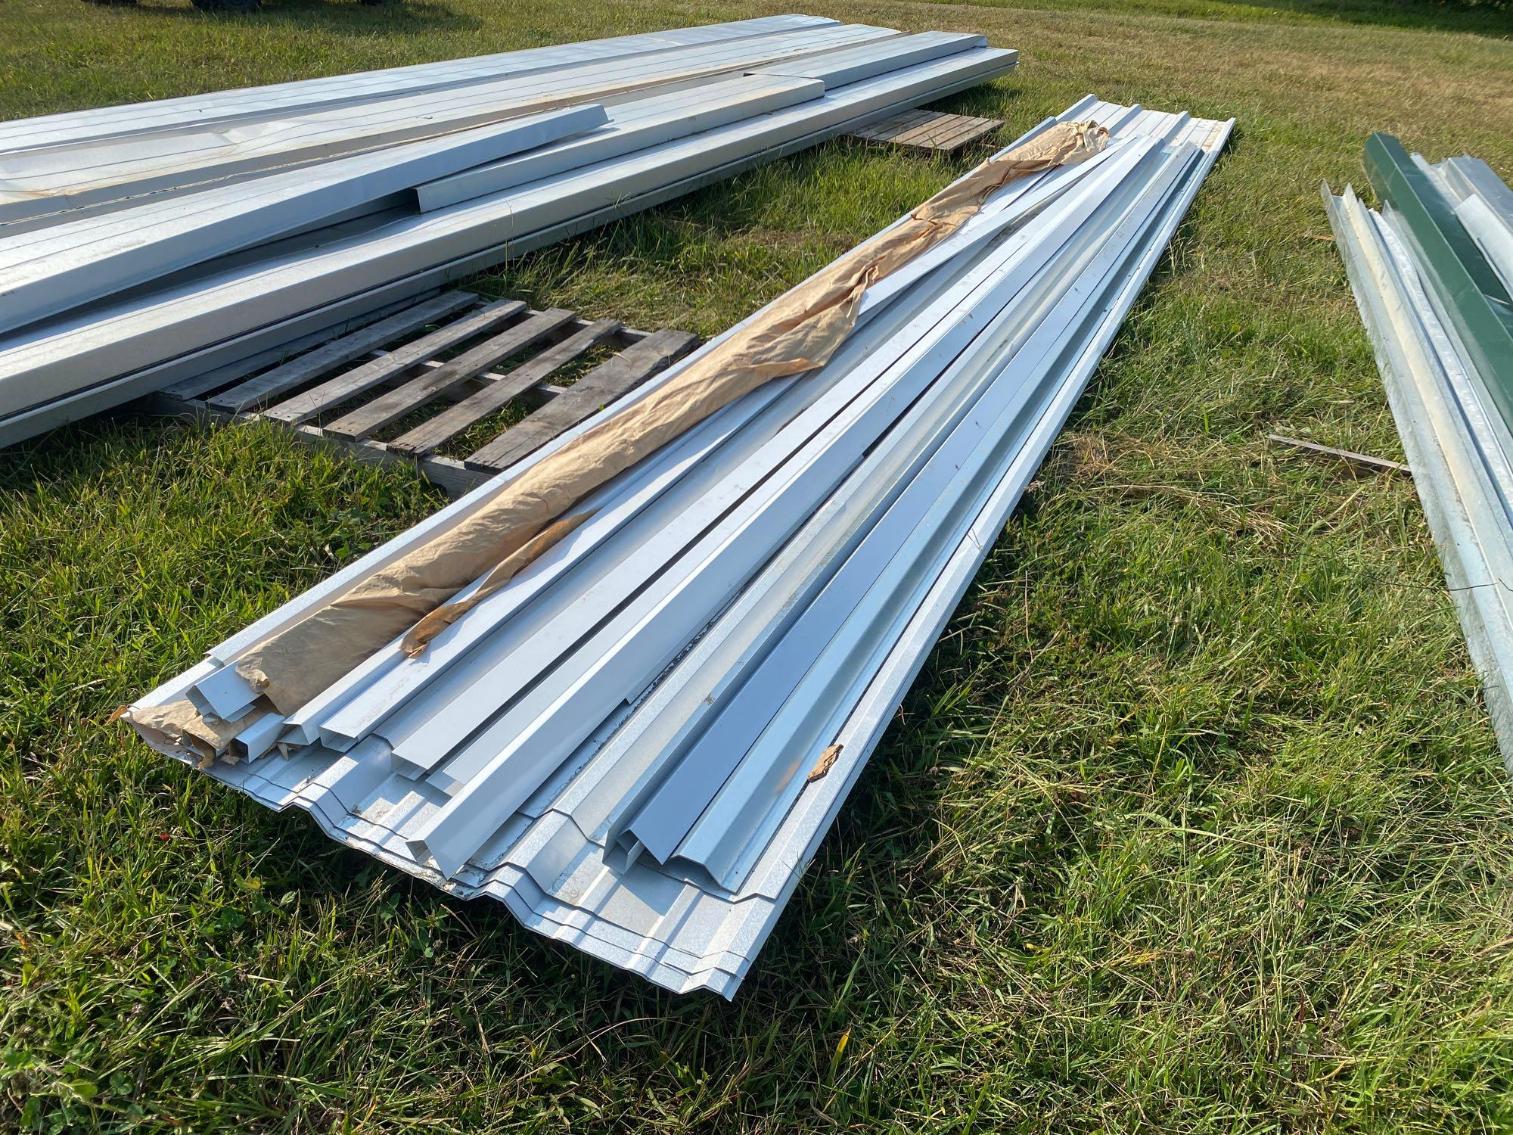 Image for Bundle of Metal Channel various sizes, Various L Shape Steel and Burglar Bars 8-10' in Length